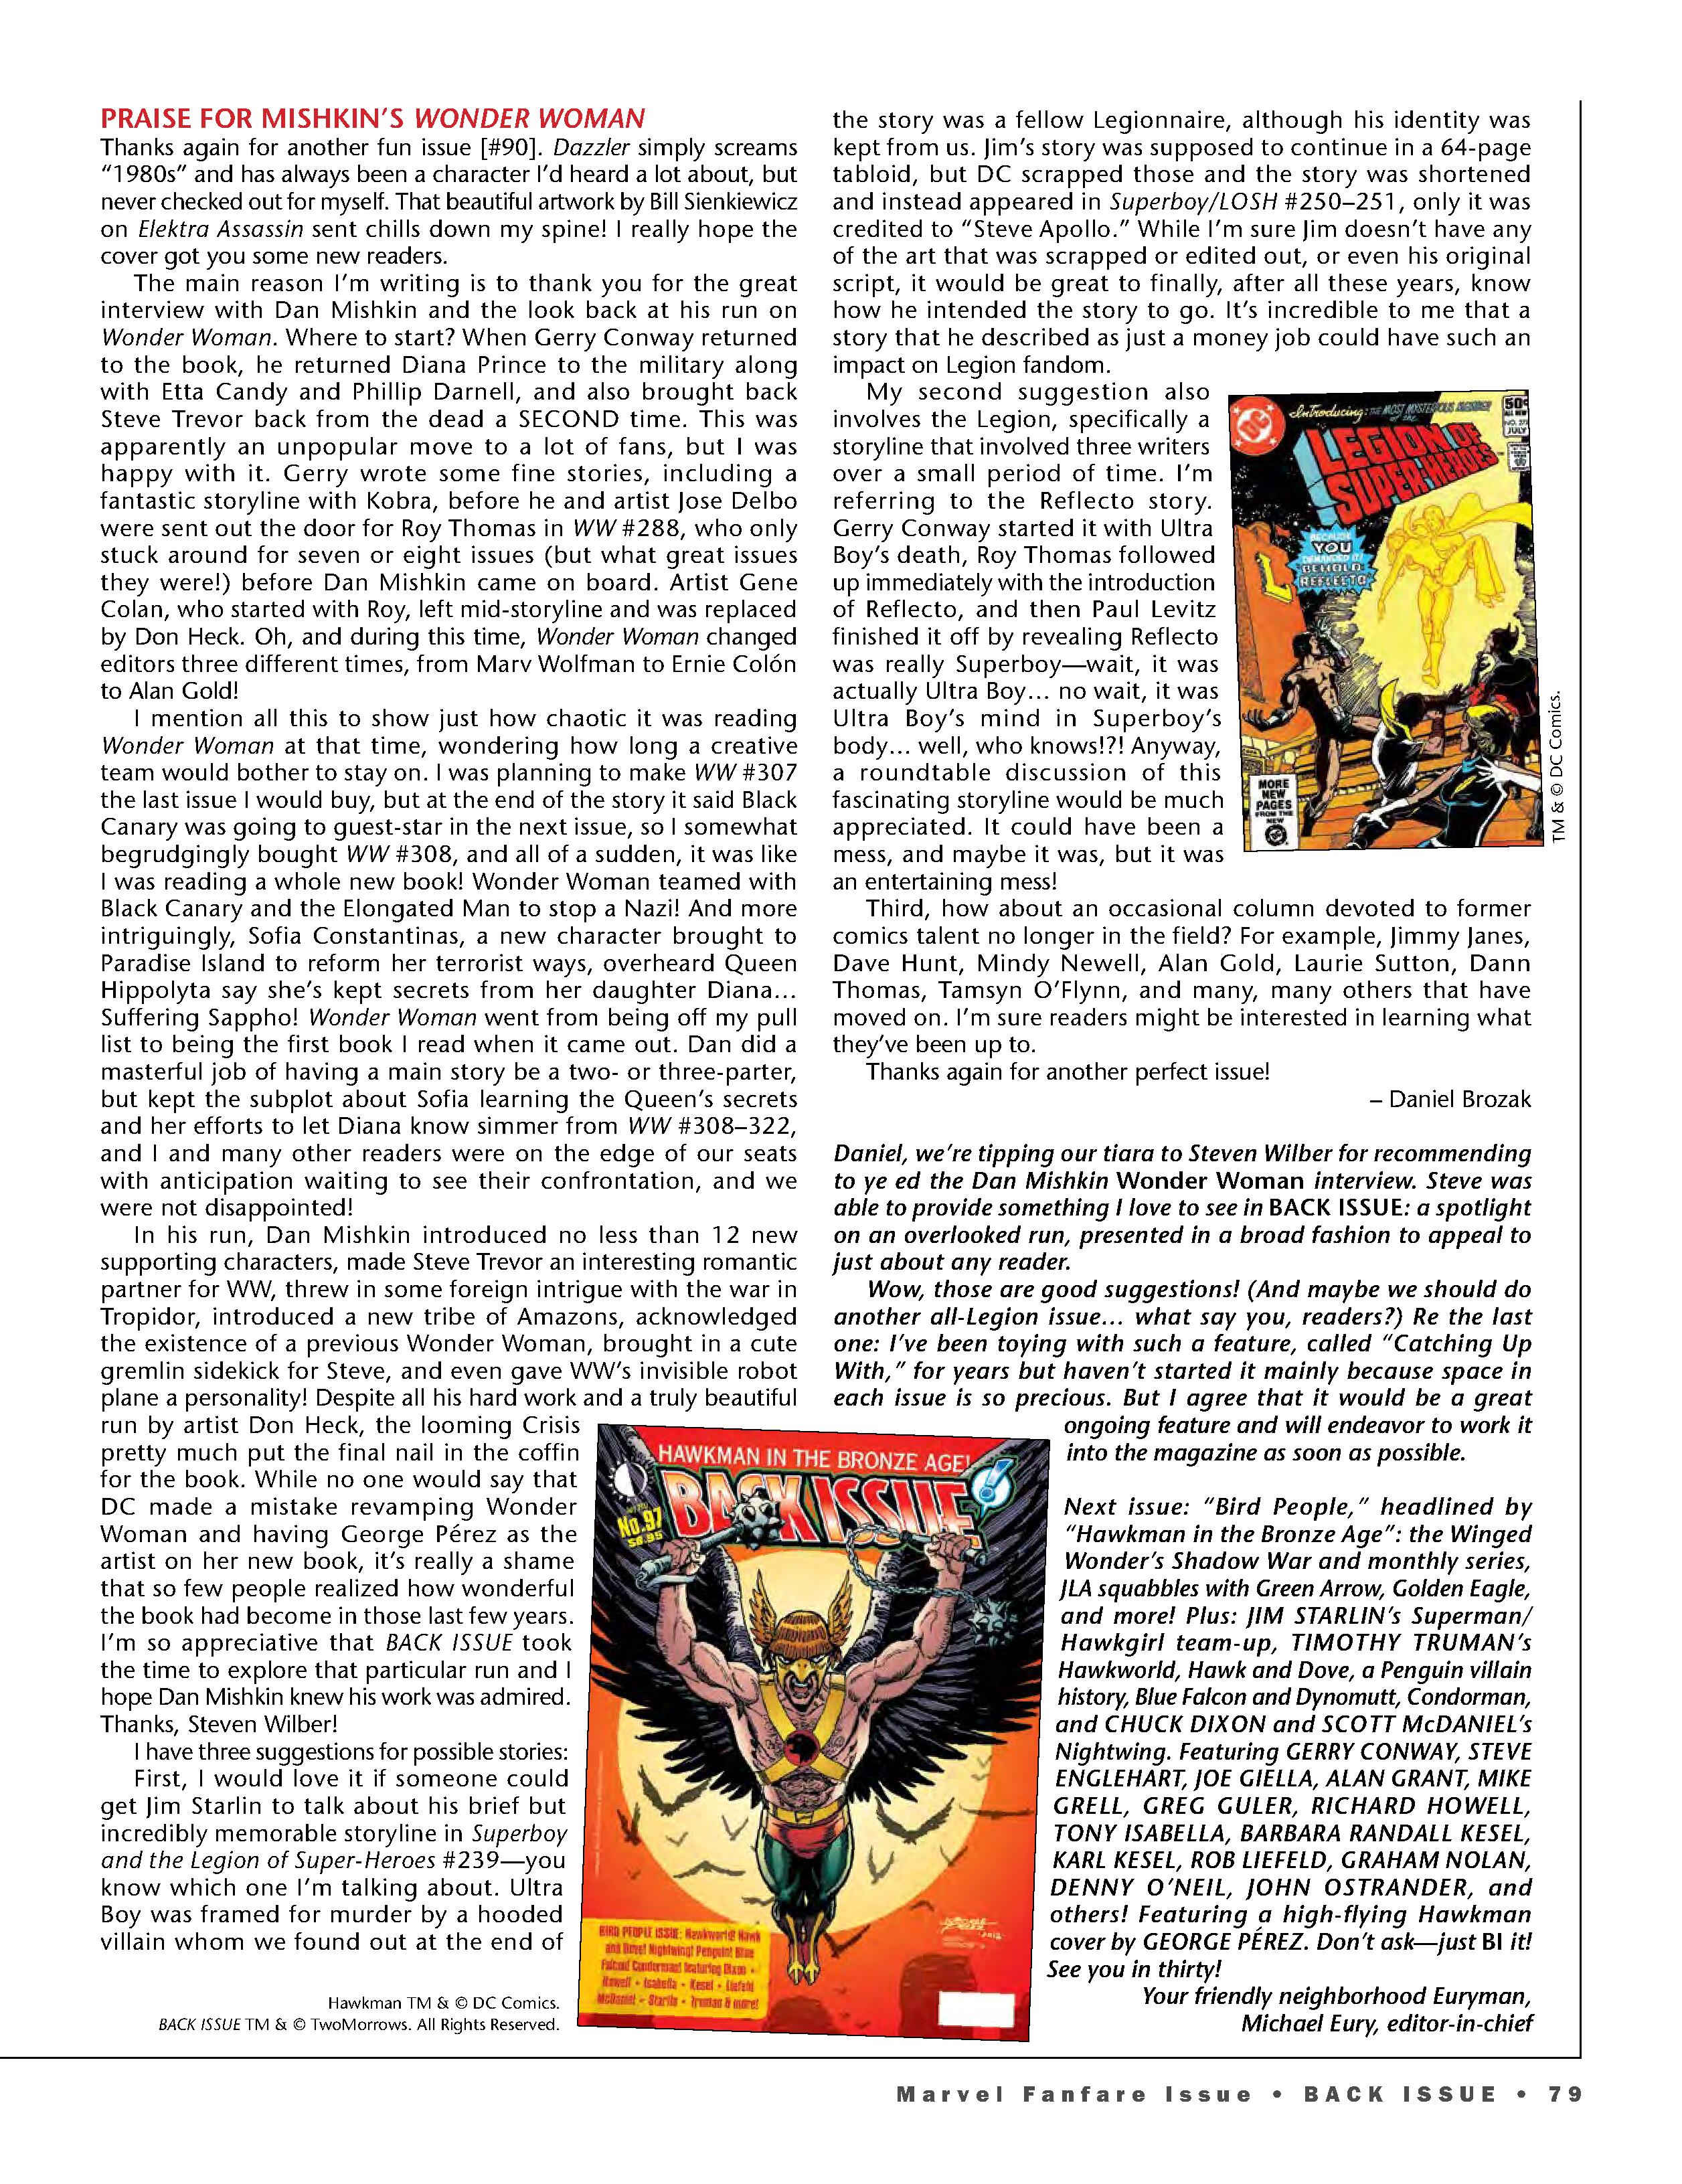 Read online Back Issue comic -  Issue #96 - 81